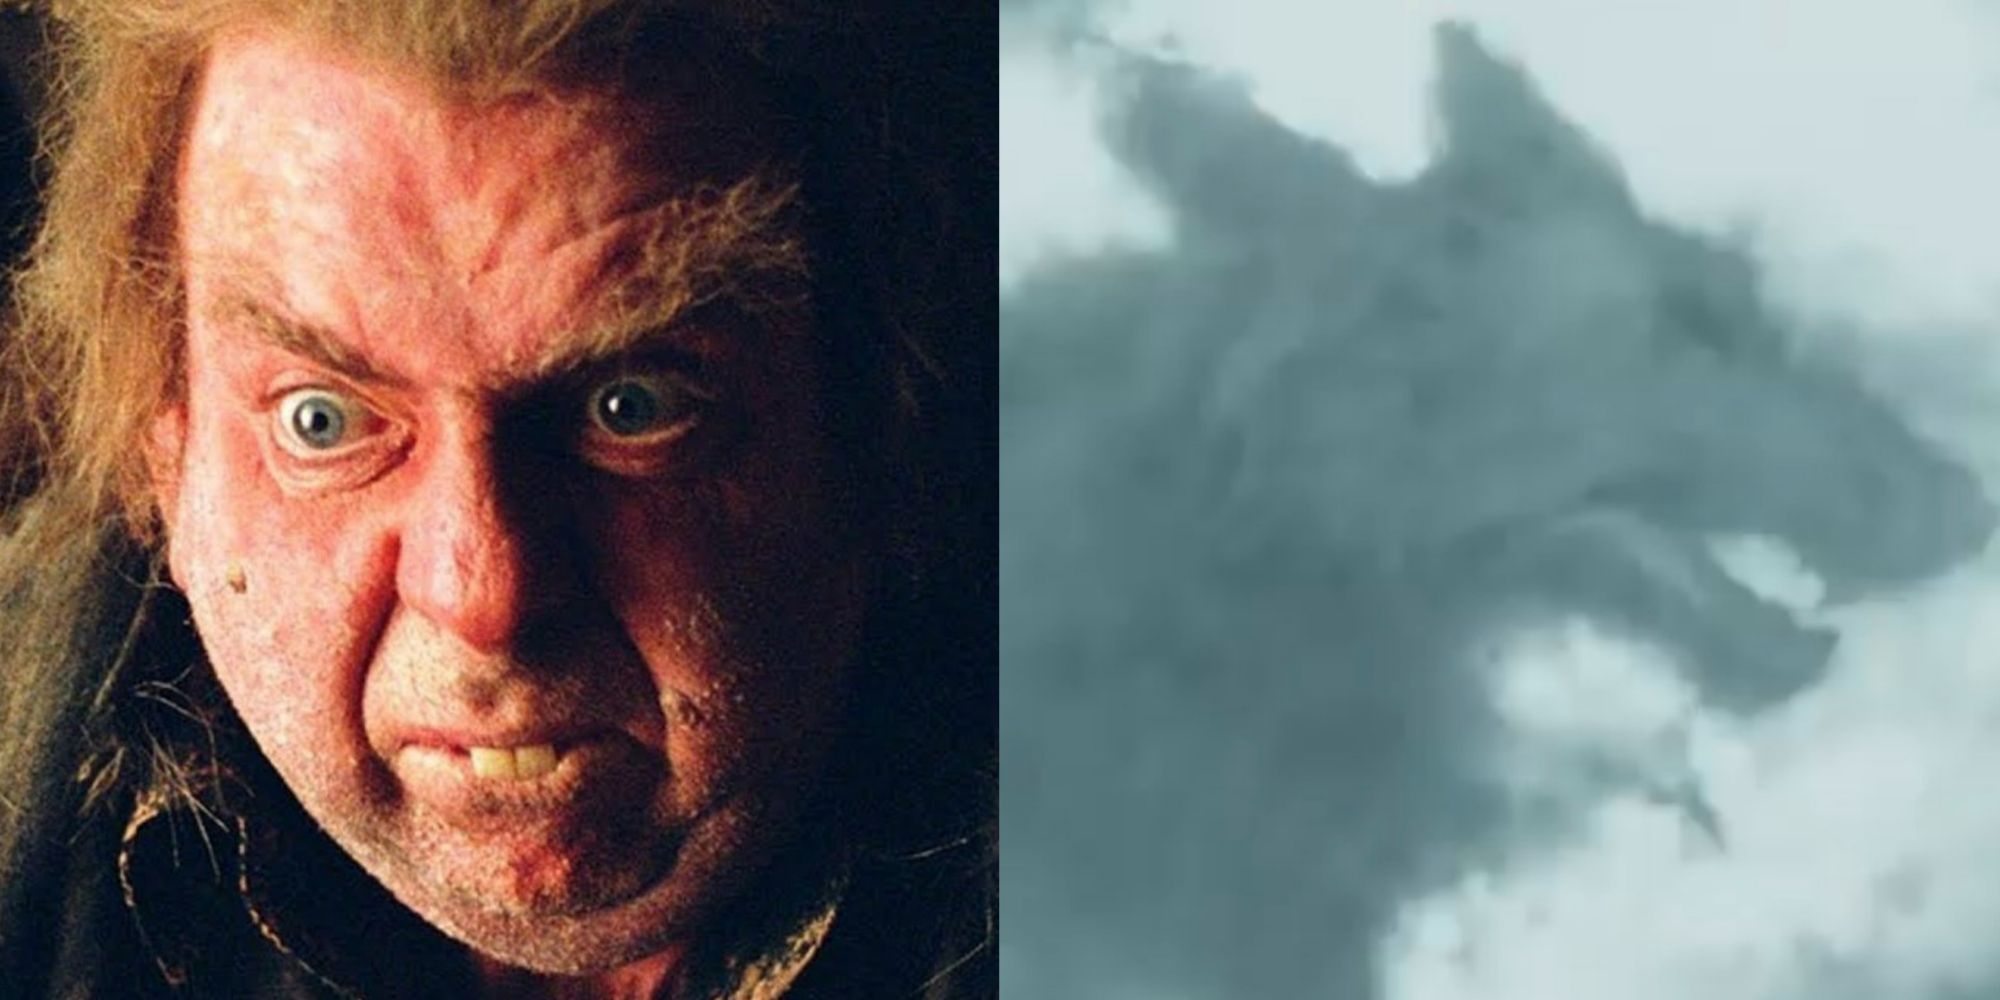 A split image showing Peter Pettigrew on the left and the Grim in the clouds on the right from Harry Potter. 